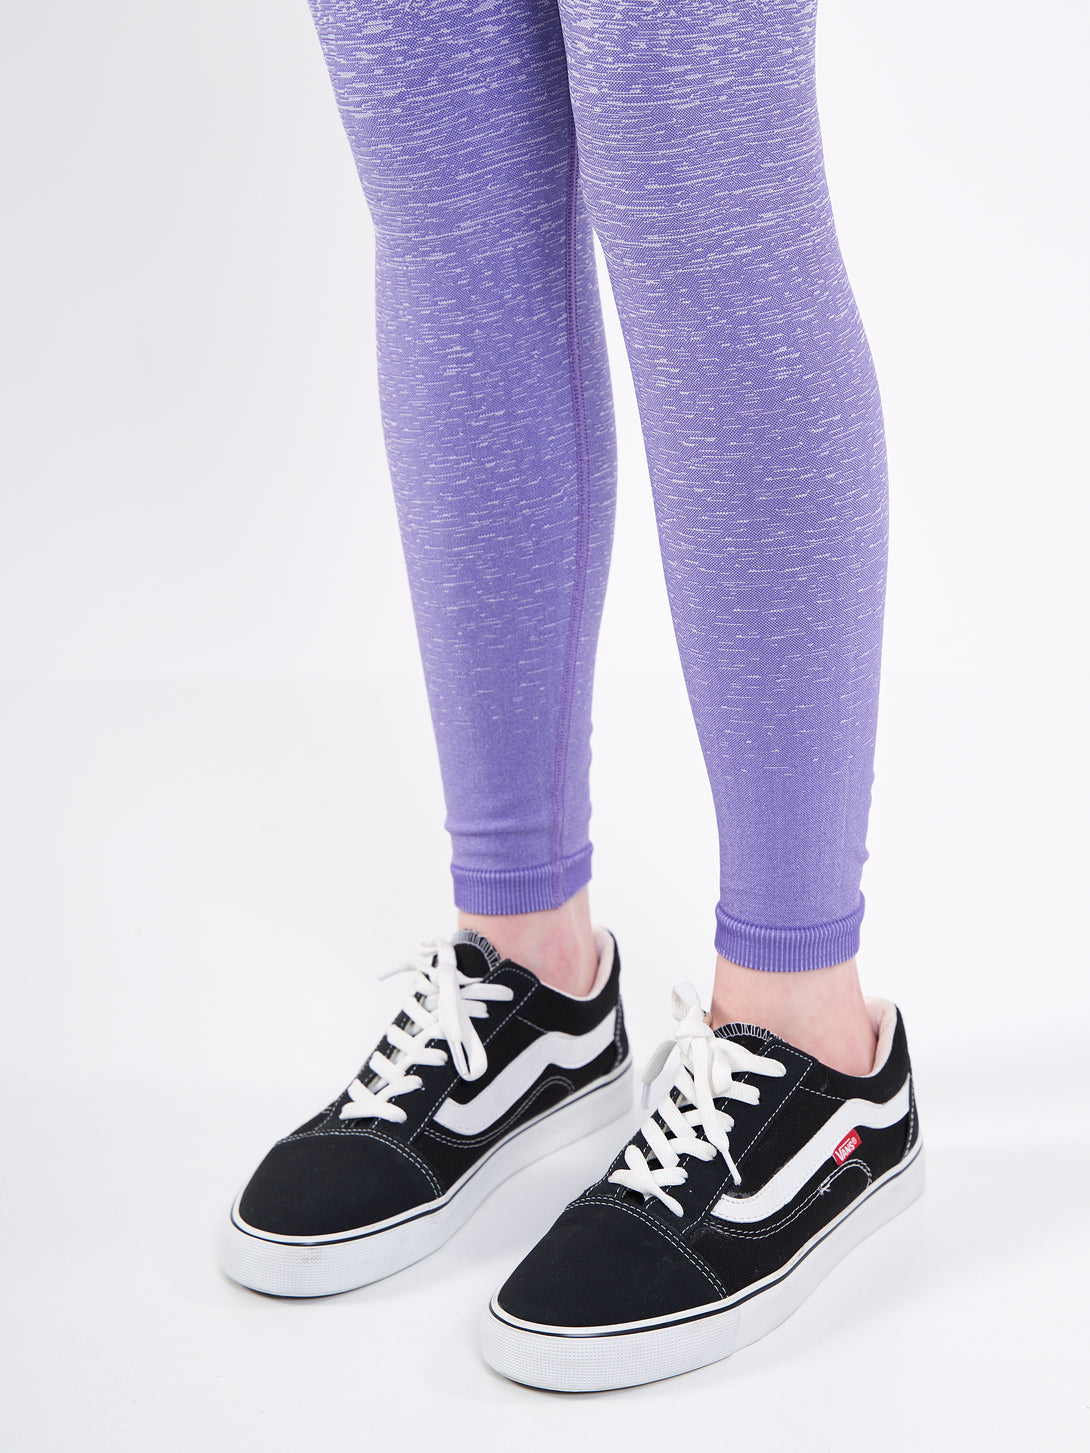 A Women Wearing Paisley Purple Color Seamless High-Waist Leggings with Ombre Effect. Chic Comfort